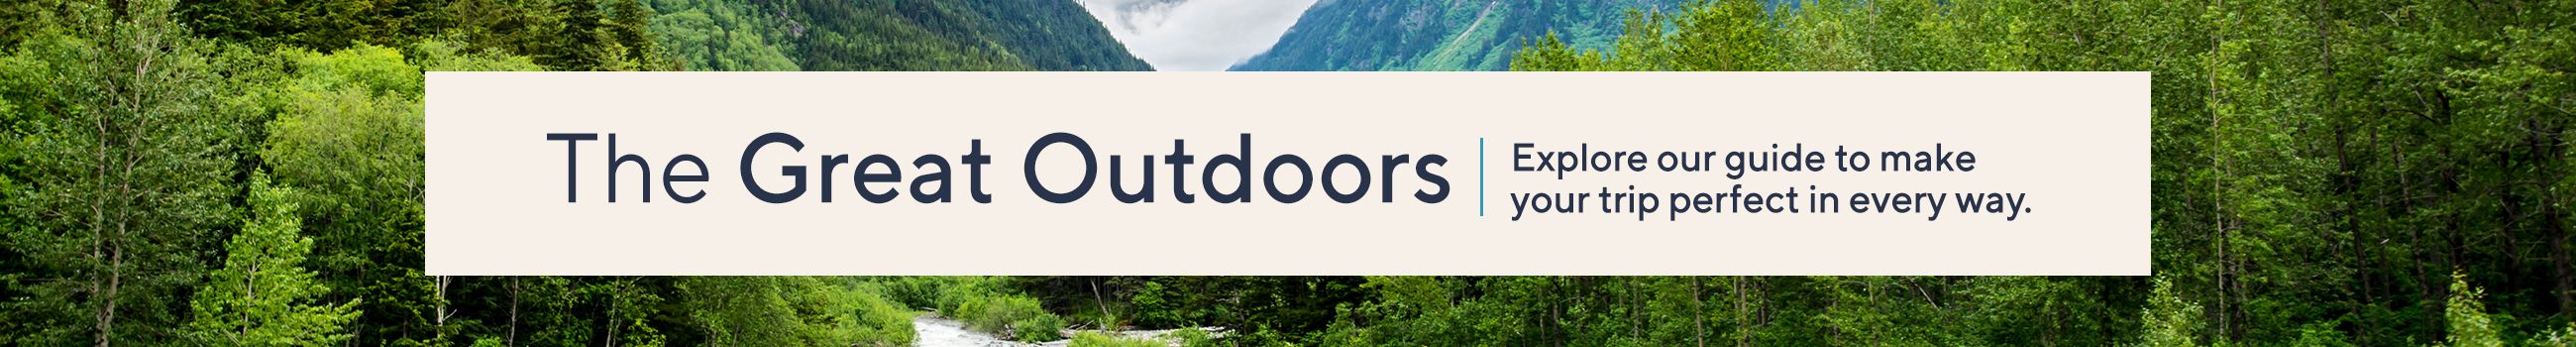 The Great Outdoors: Explore our guide to make your trip perfect in every way.